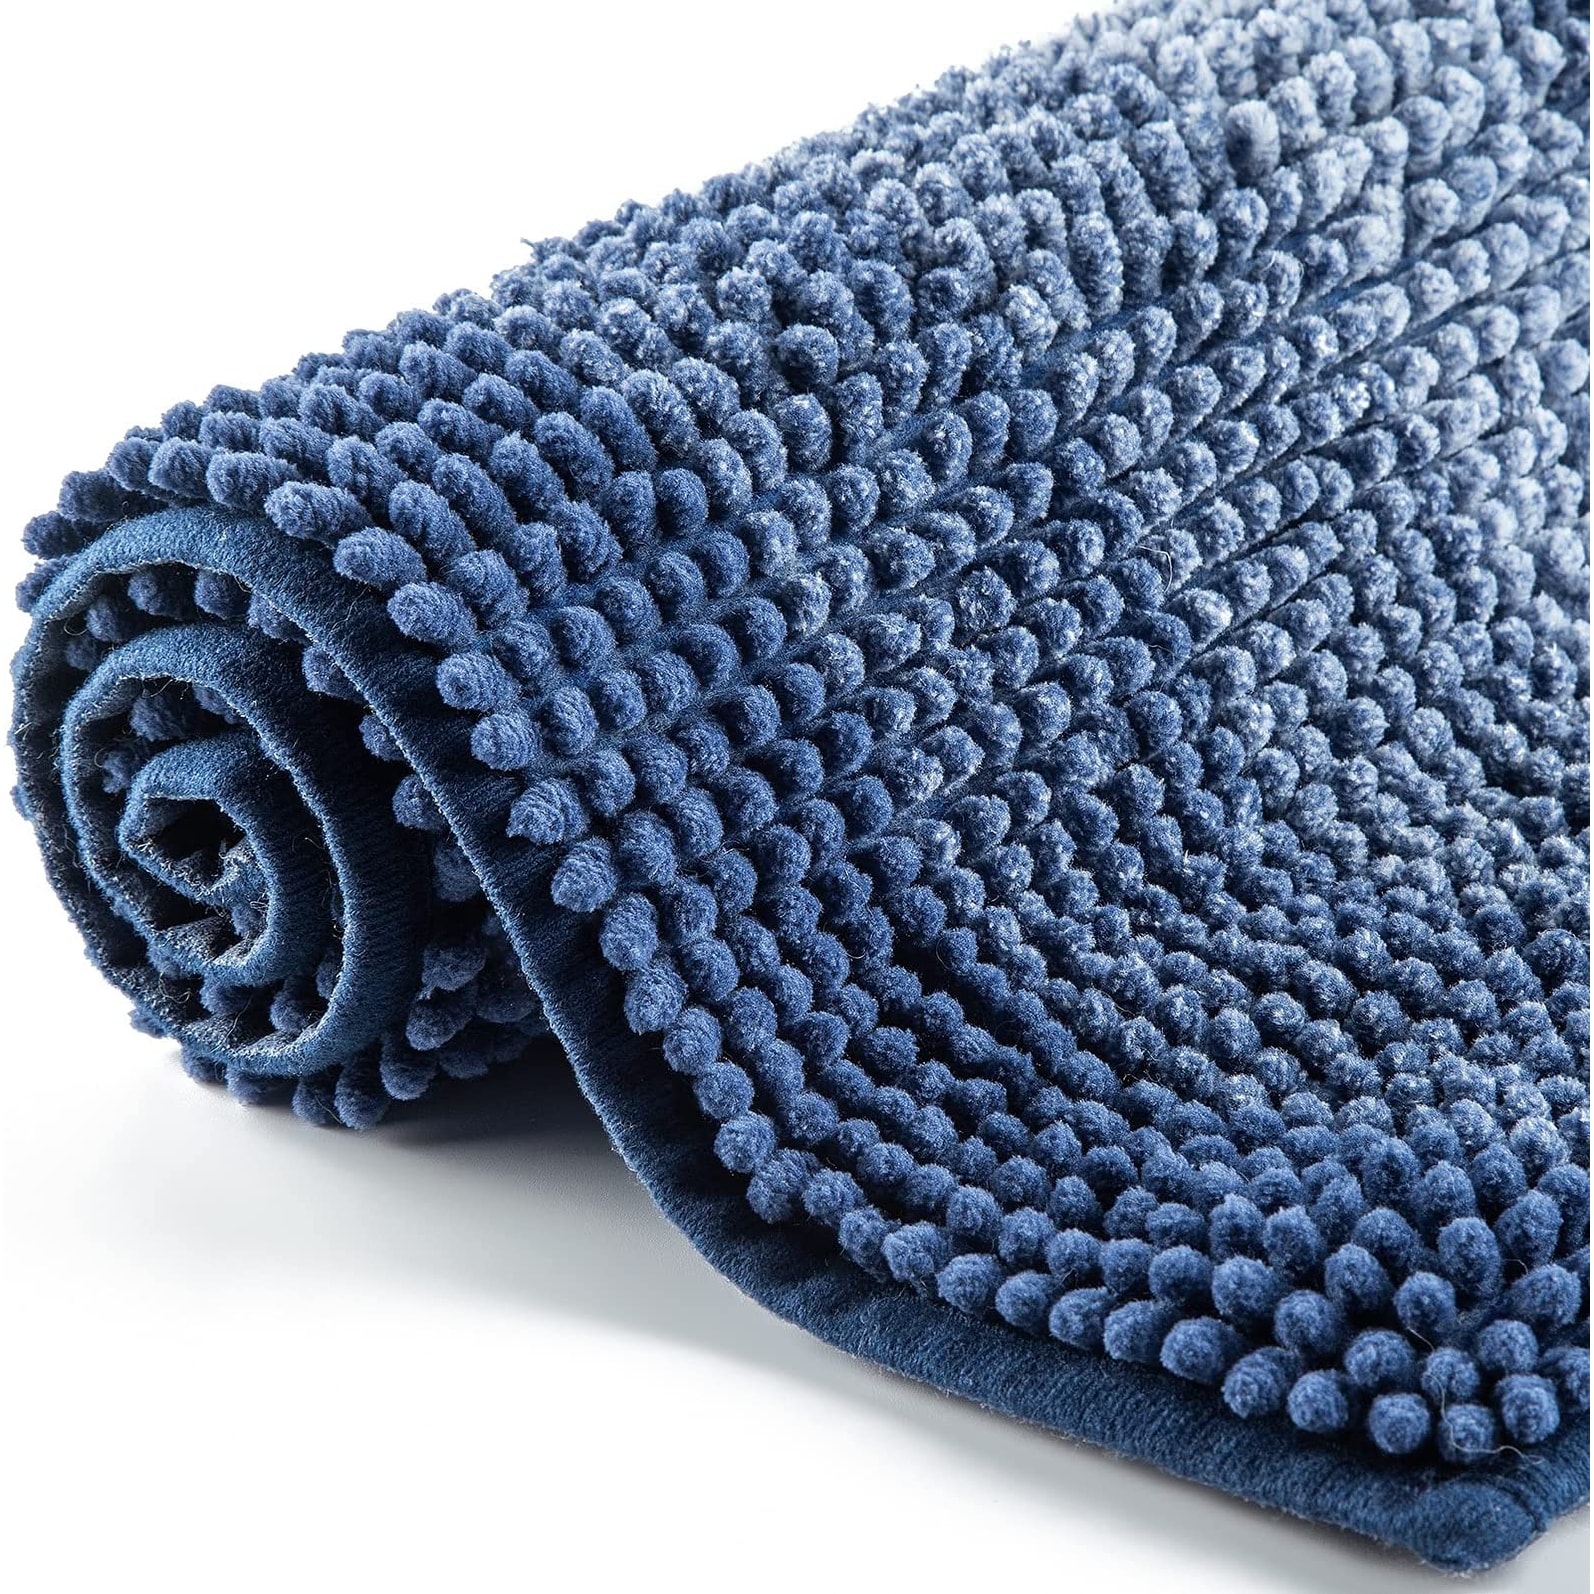 https://ak1.ostkcdn.com/images/products/is/images/direct/a5b70127ac54bf9f6b3a7b49bf0062ad0b3043ad/Blue-Bathroom-Rugs%2CBath-Mat-for-Bathroom%2C20%22x-32%22.jpg